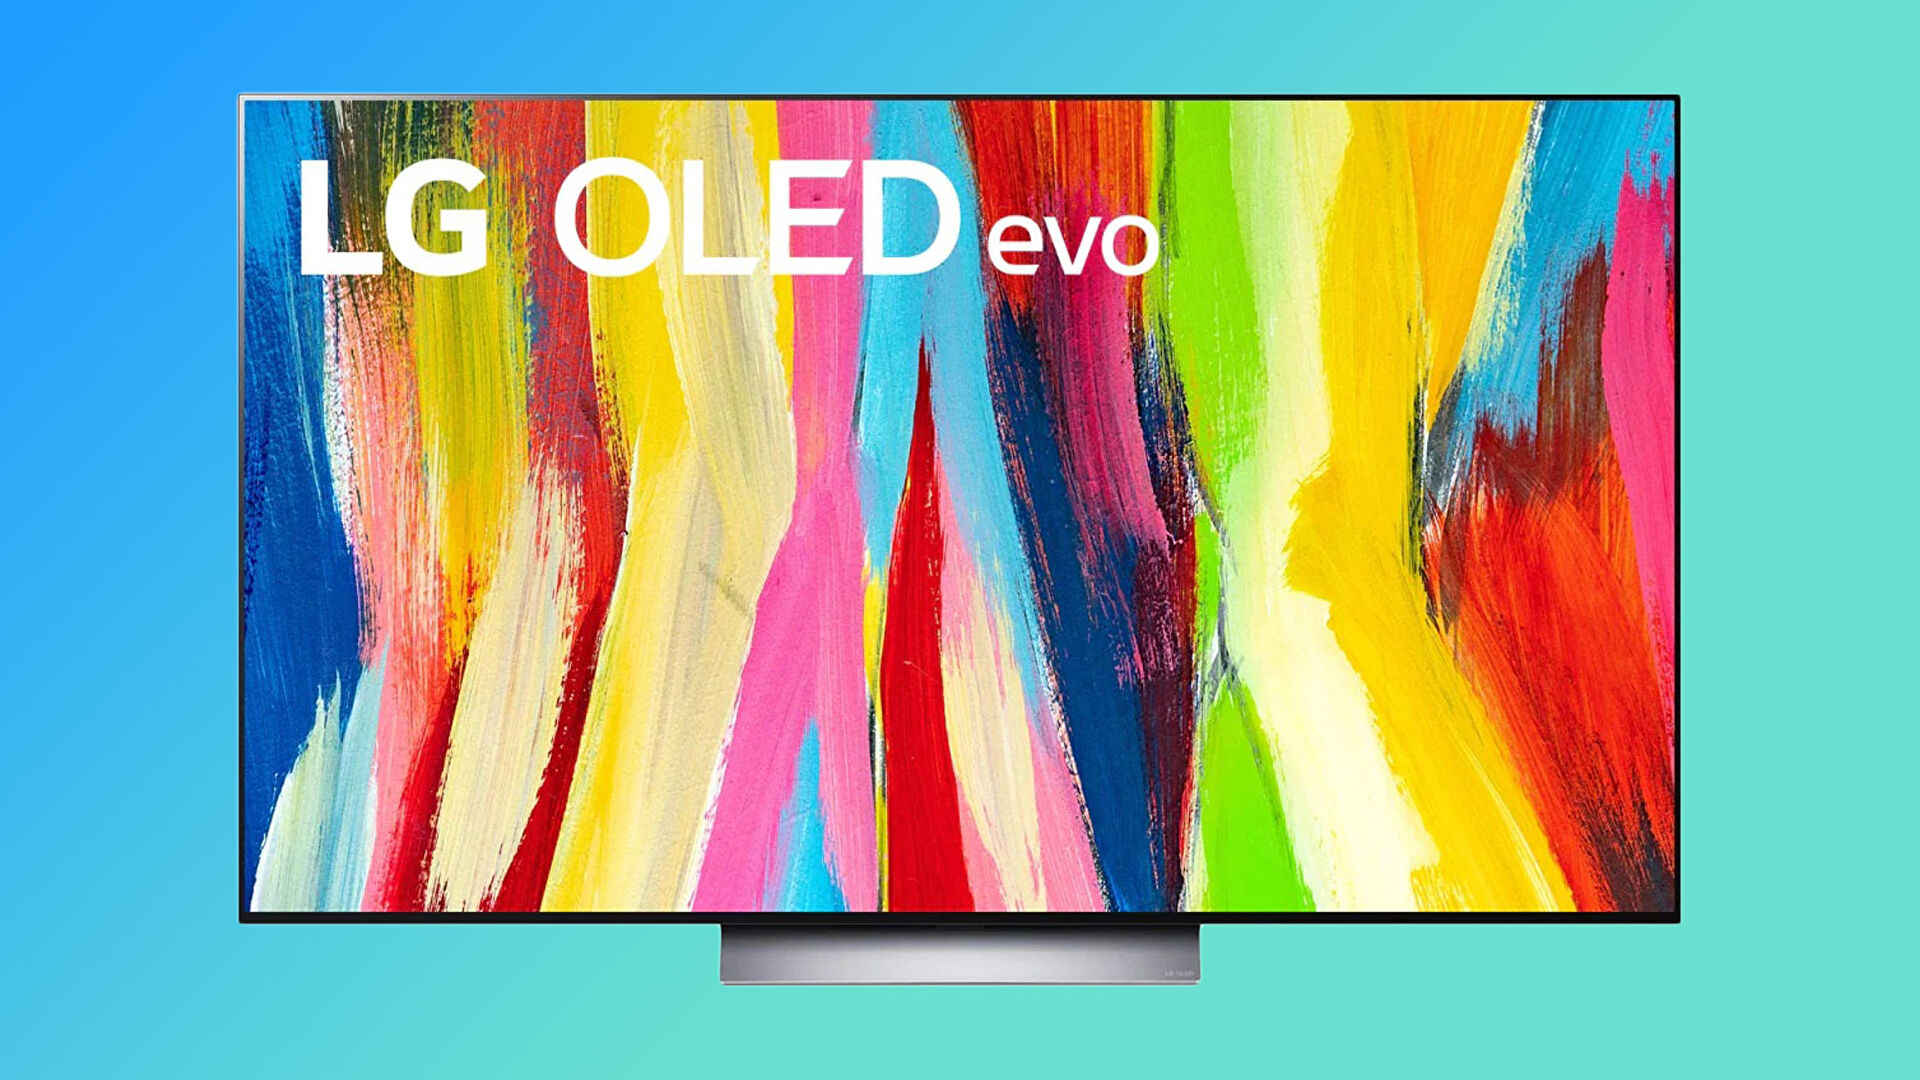 Get the 42-inch or 48-inch LG C2 OLED for £999